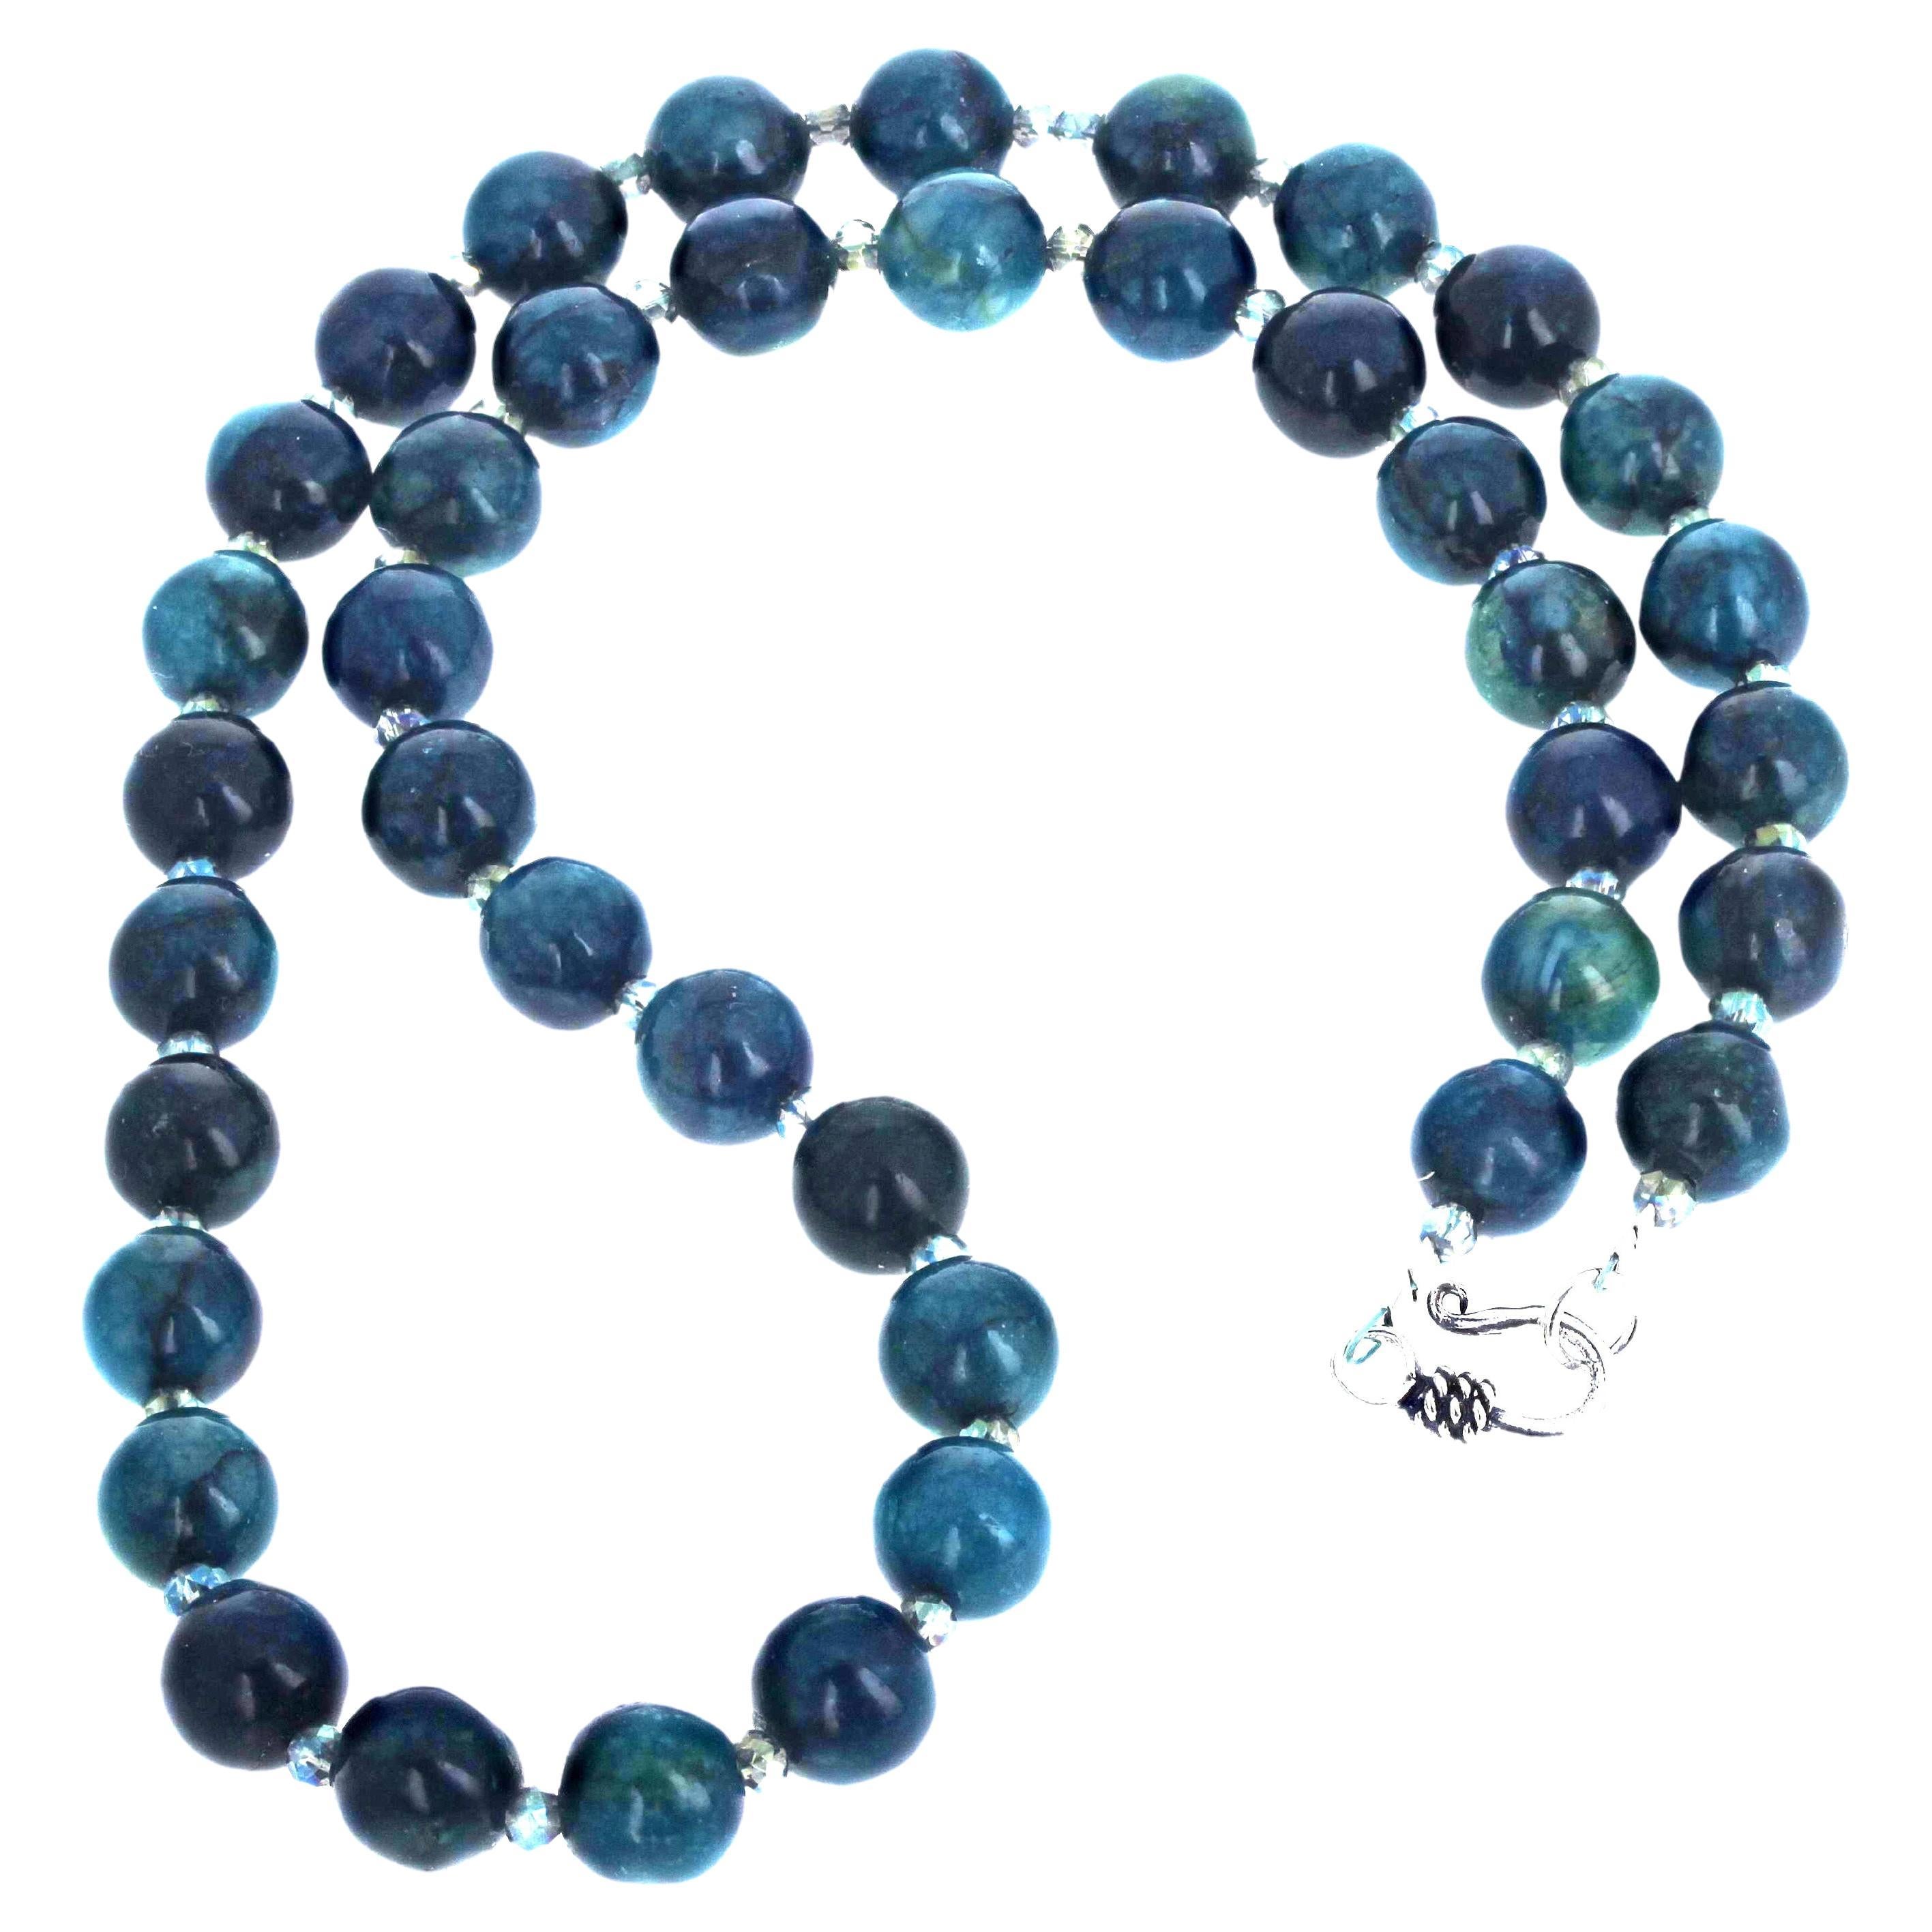 Fascinating Many-colored shades of blue and blue-green natural Azurite.  The Azurites are 10mm and enhanced with glittering sparkling crystals.  The clasp is an easy to use silver plated hook clasp.  This necklace is 20 inches long.  